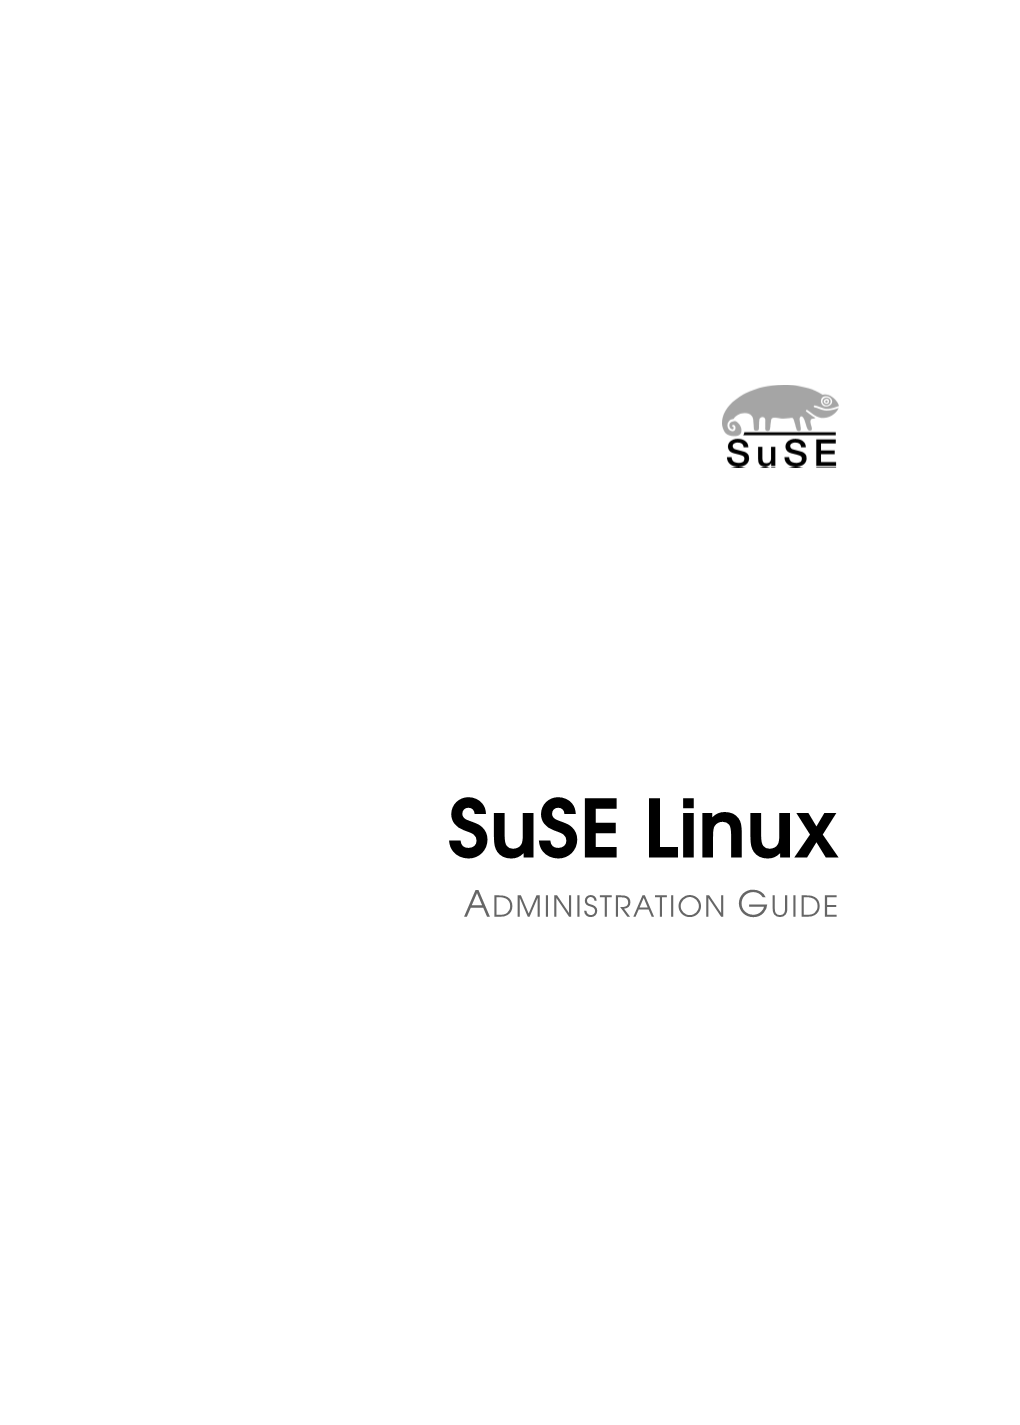 Suse Linux / Administration Guide